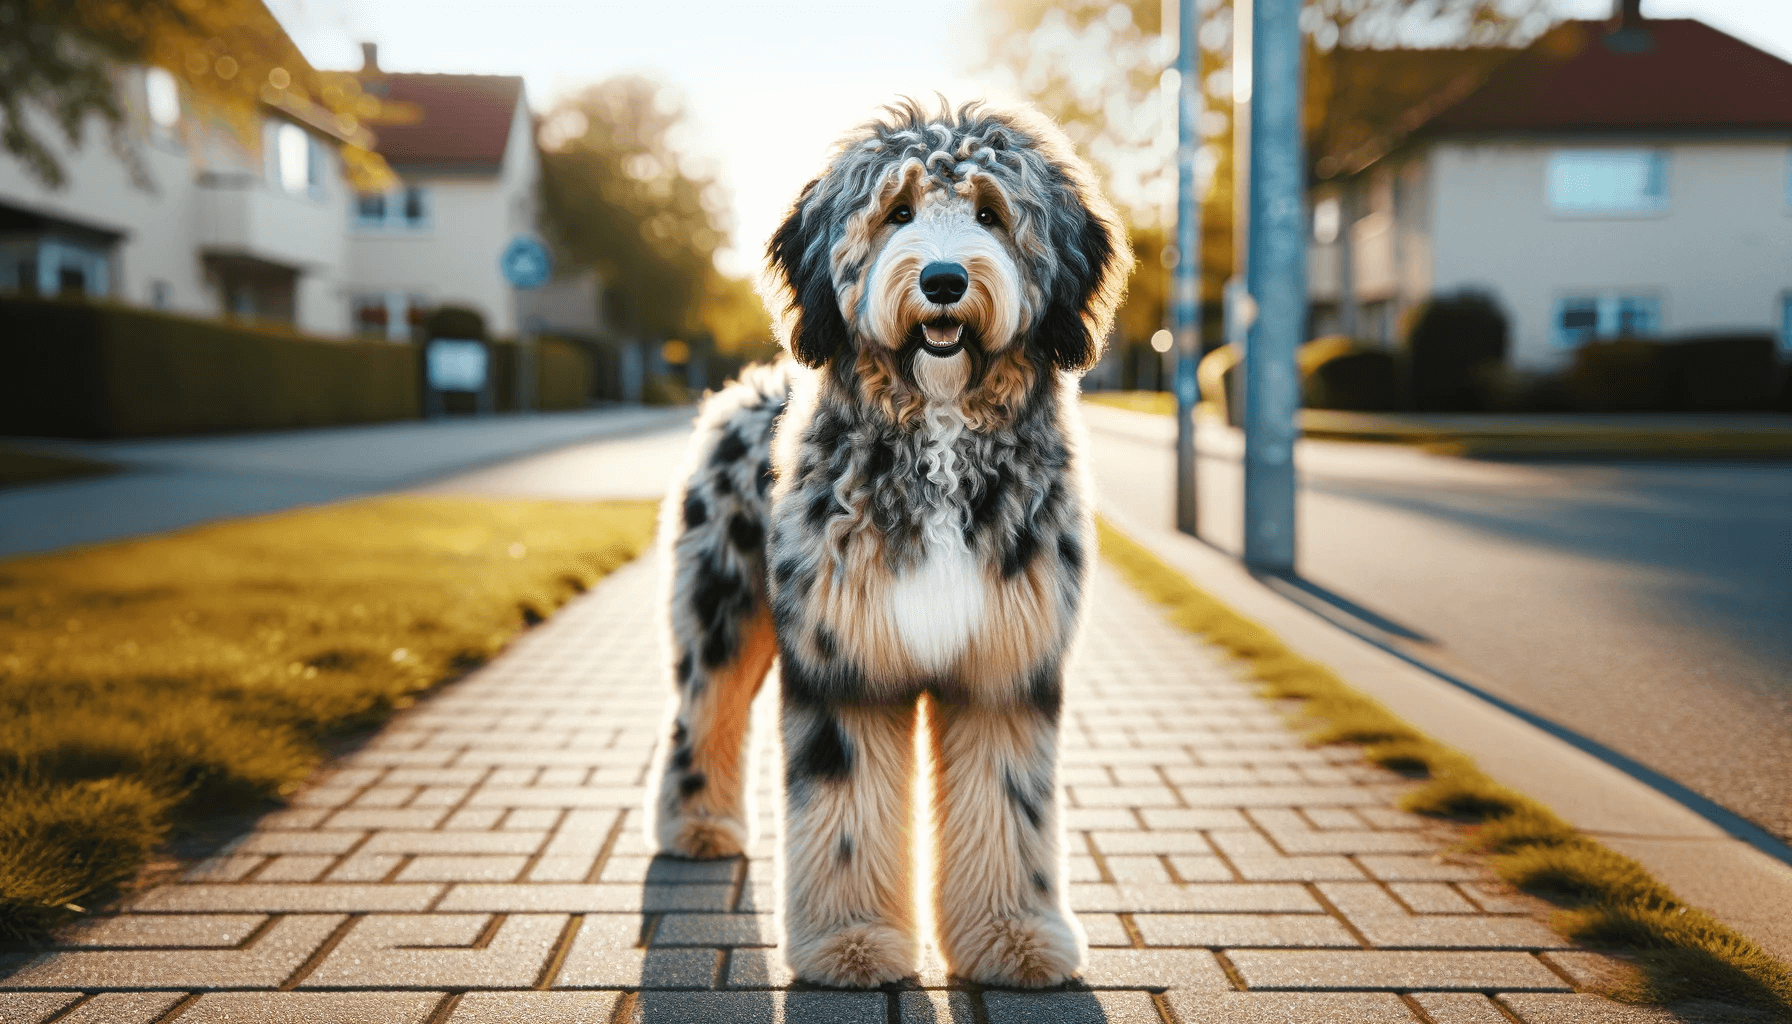 Adult Merle Aussiedoodle standing confidently on a sidewalk, showcasing its beautiful merle coat.